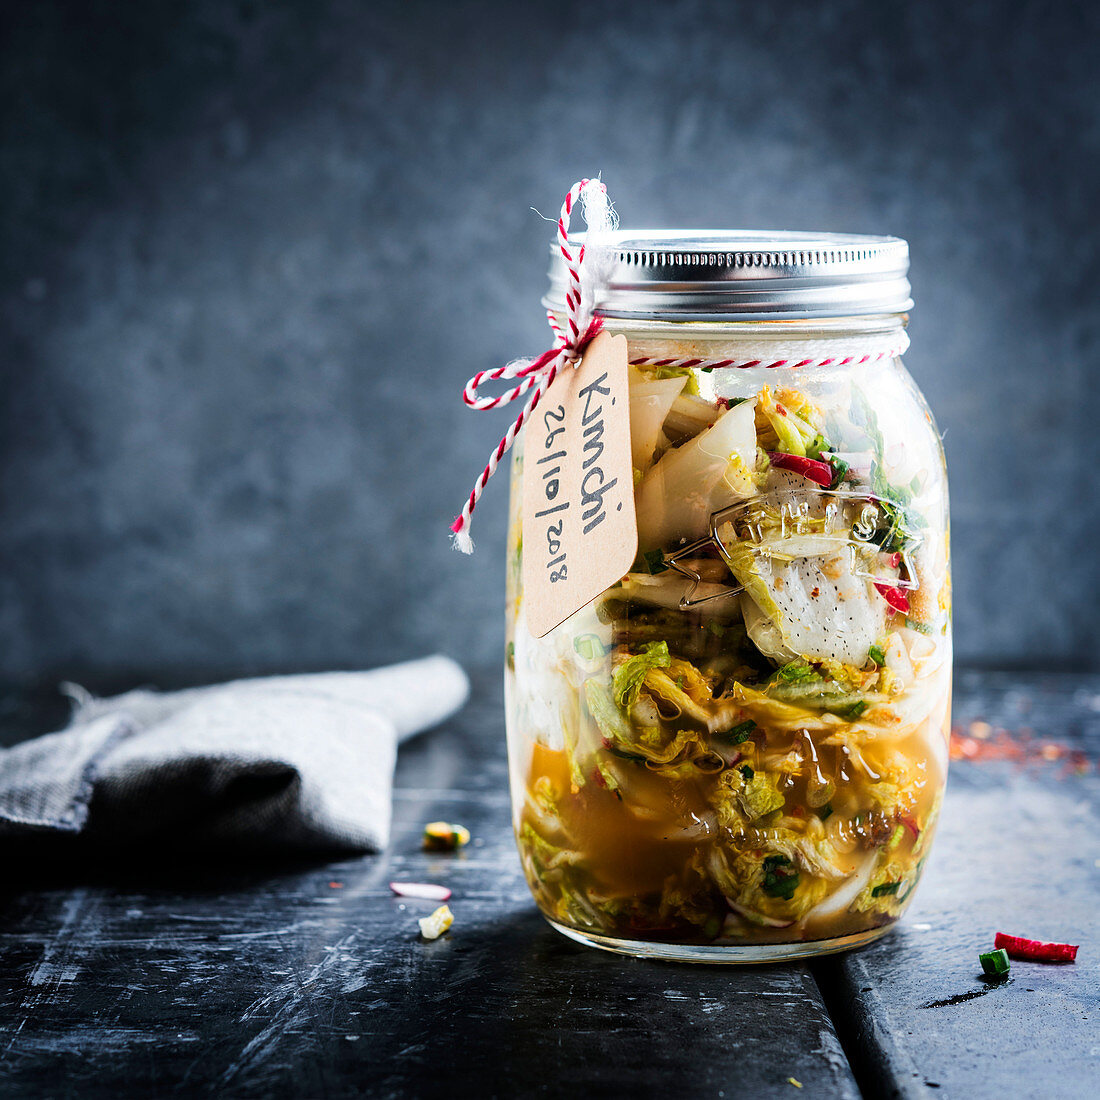 Homemade kimchi in a preserving jar